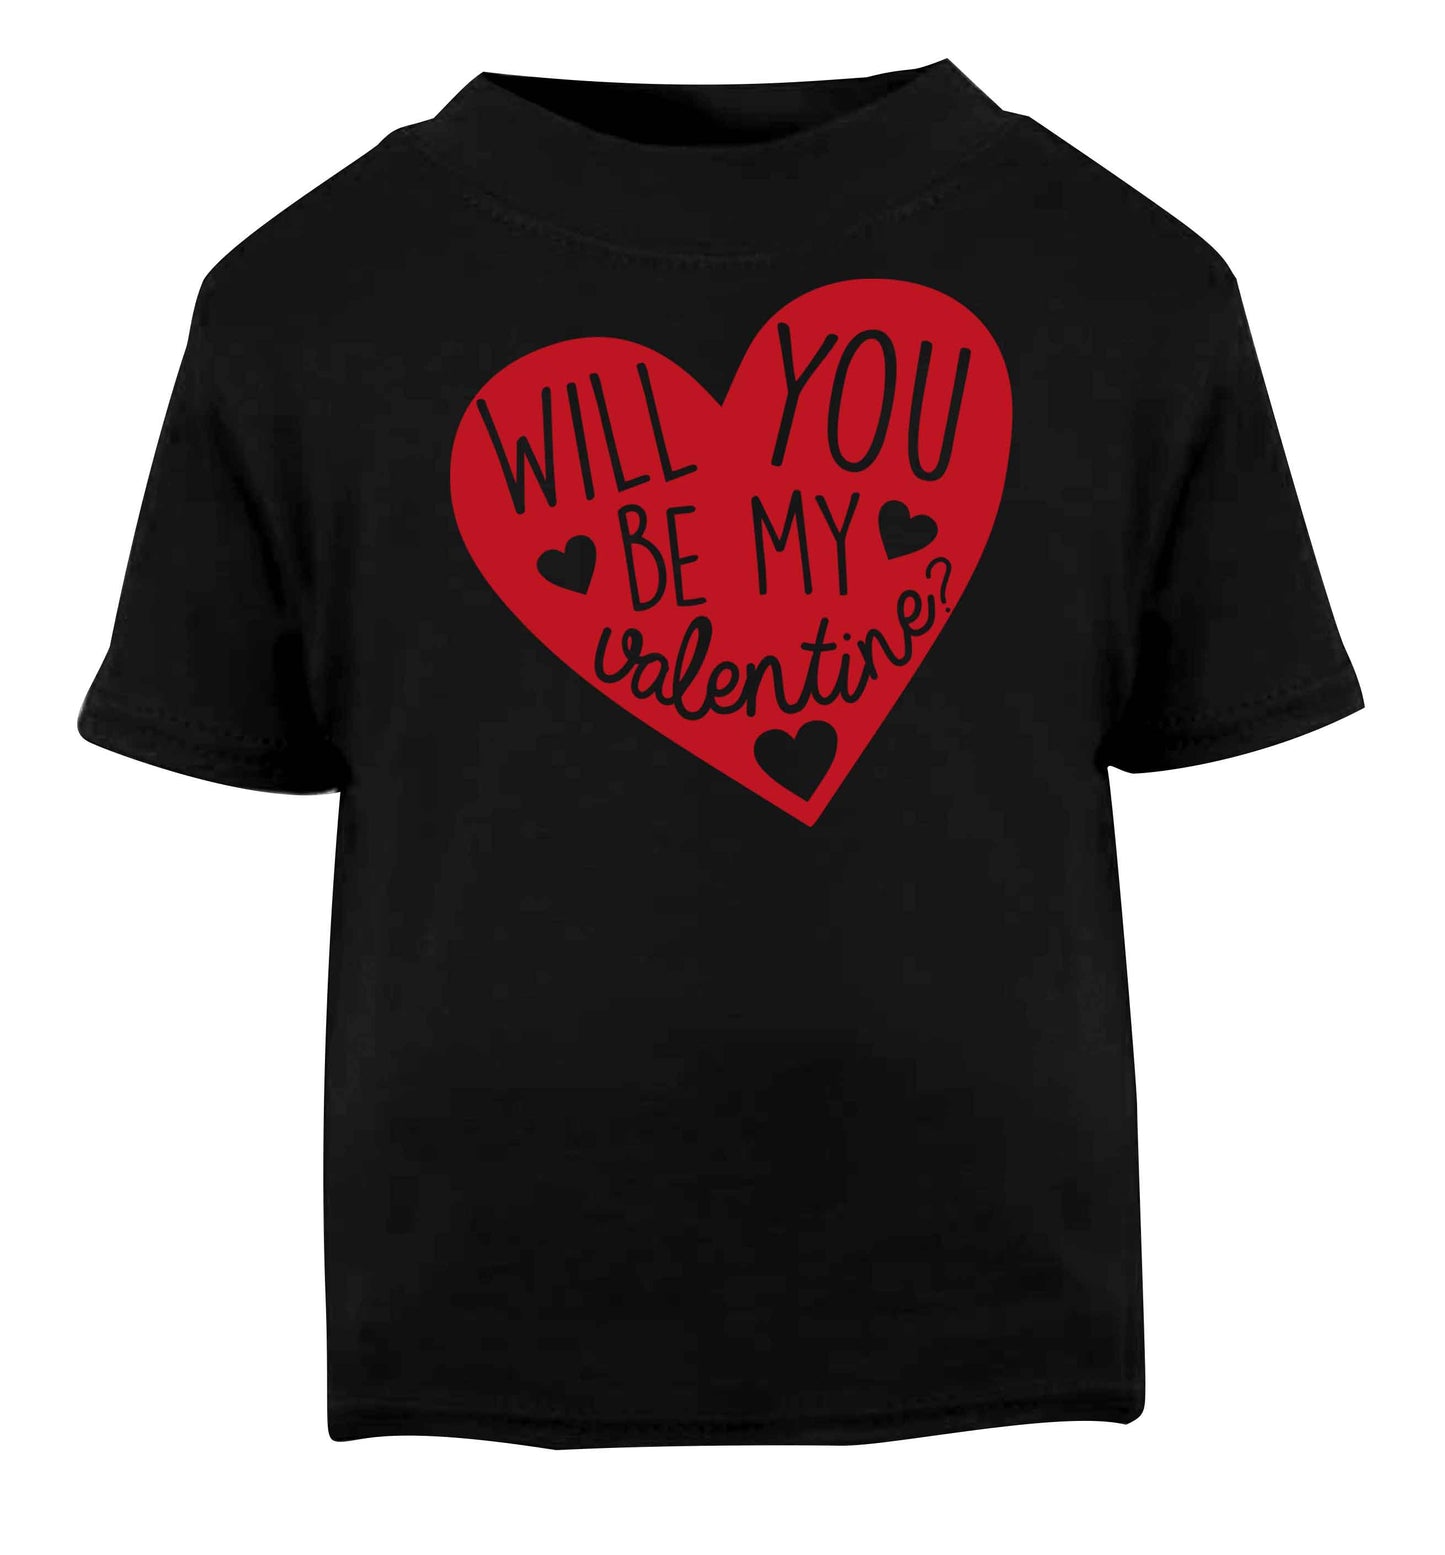 Will you be my valentine? Black baby toddler Tshirt 2 years